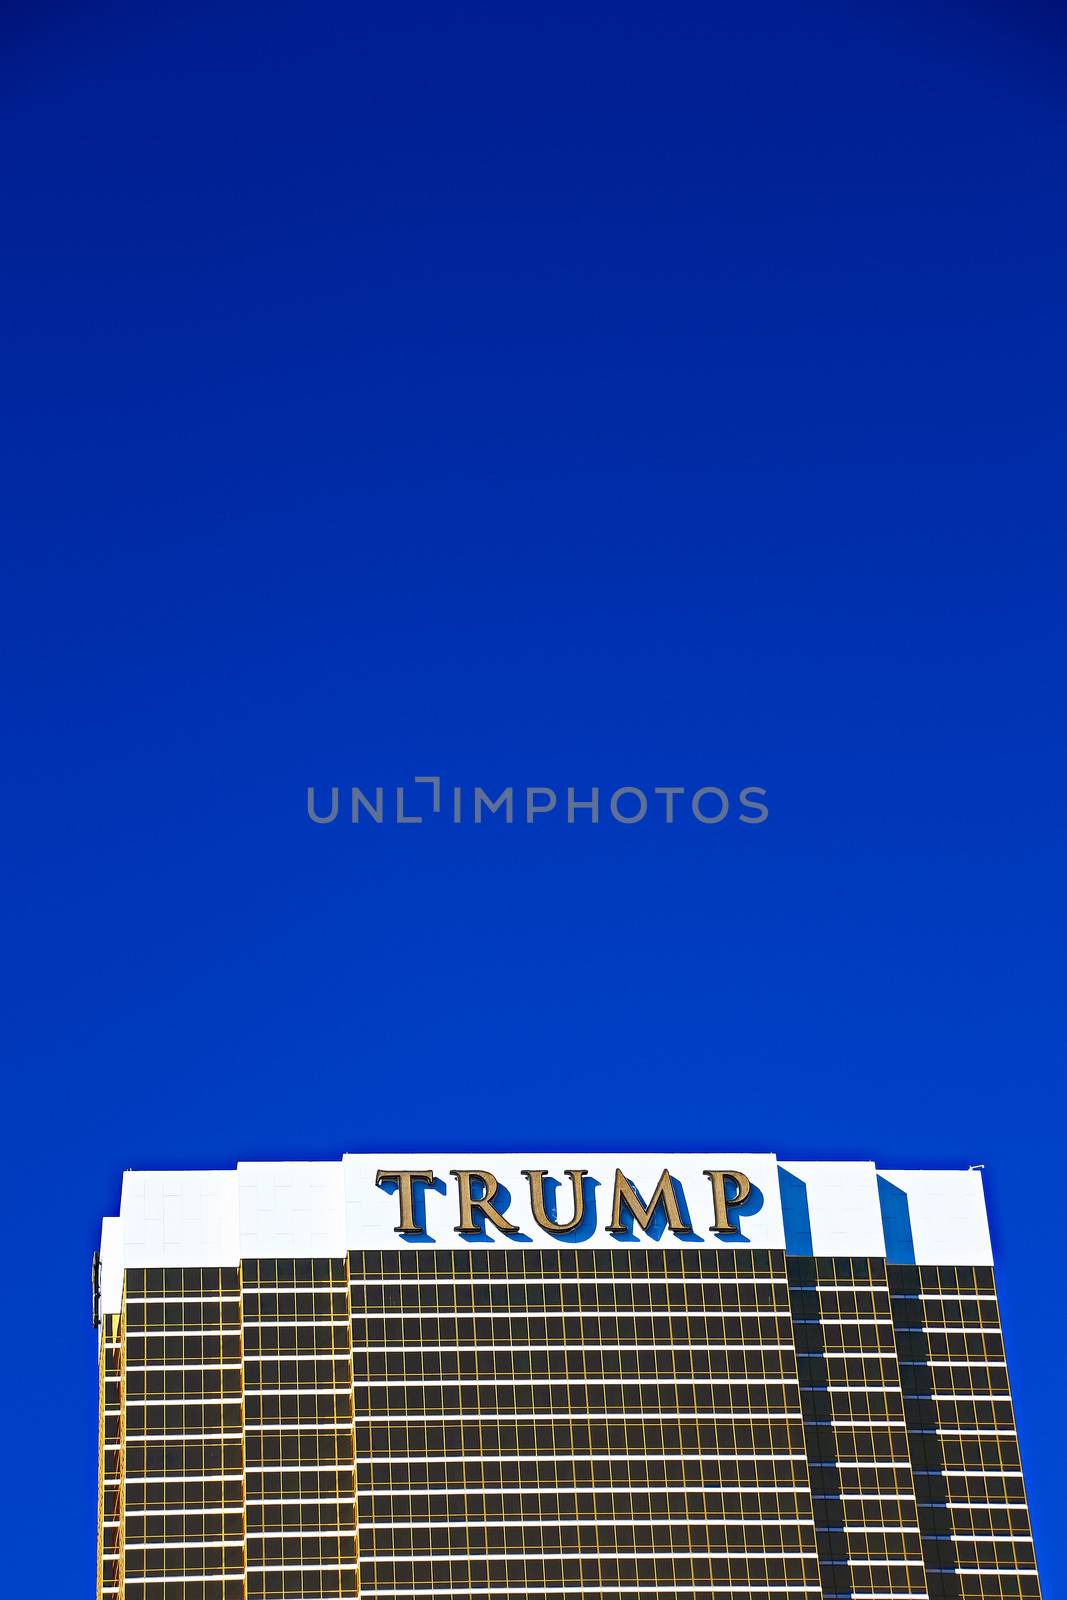 Las Vegas, USA - Sep 17, 2018: Trump International Hotel in Las Vegas, NV, named for real estate developer and politician Donald Trump. The luxury property's windows are gilded with 24-carat gold. by USA-TARO